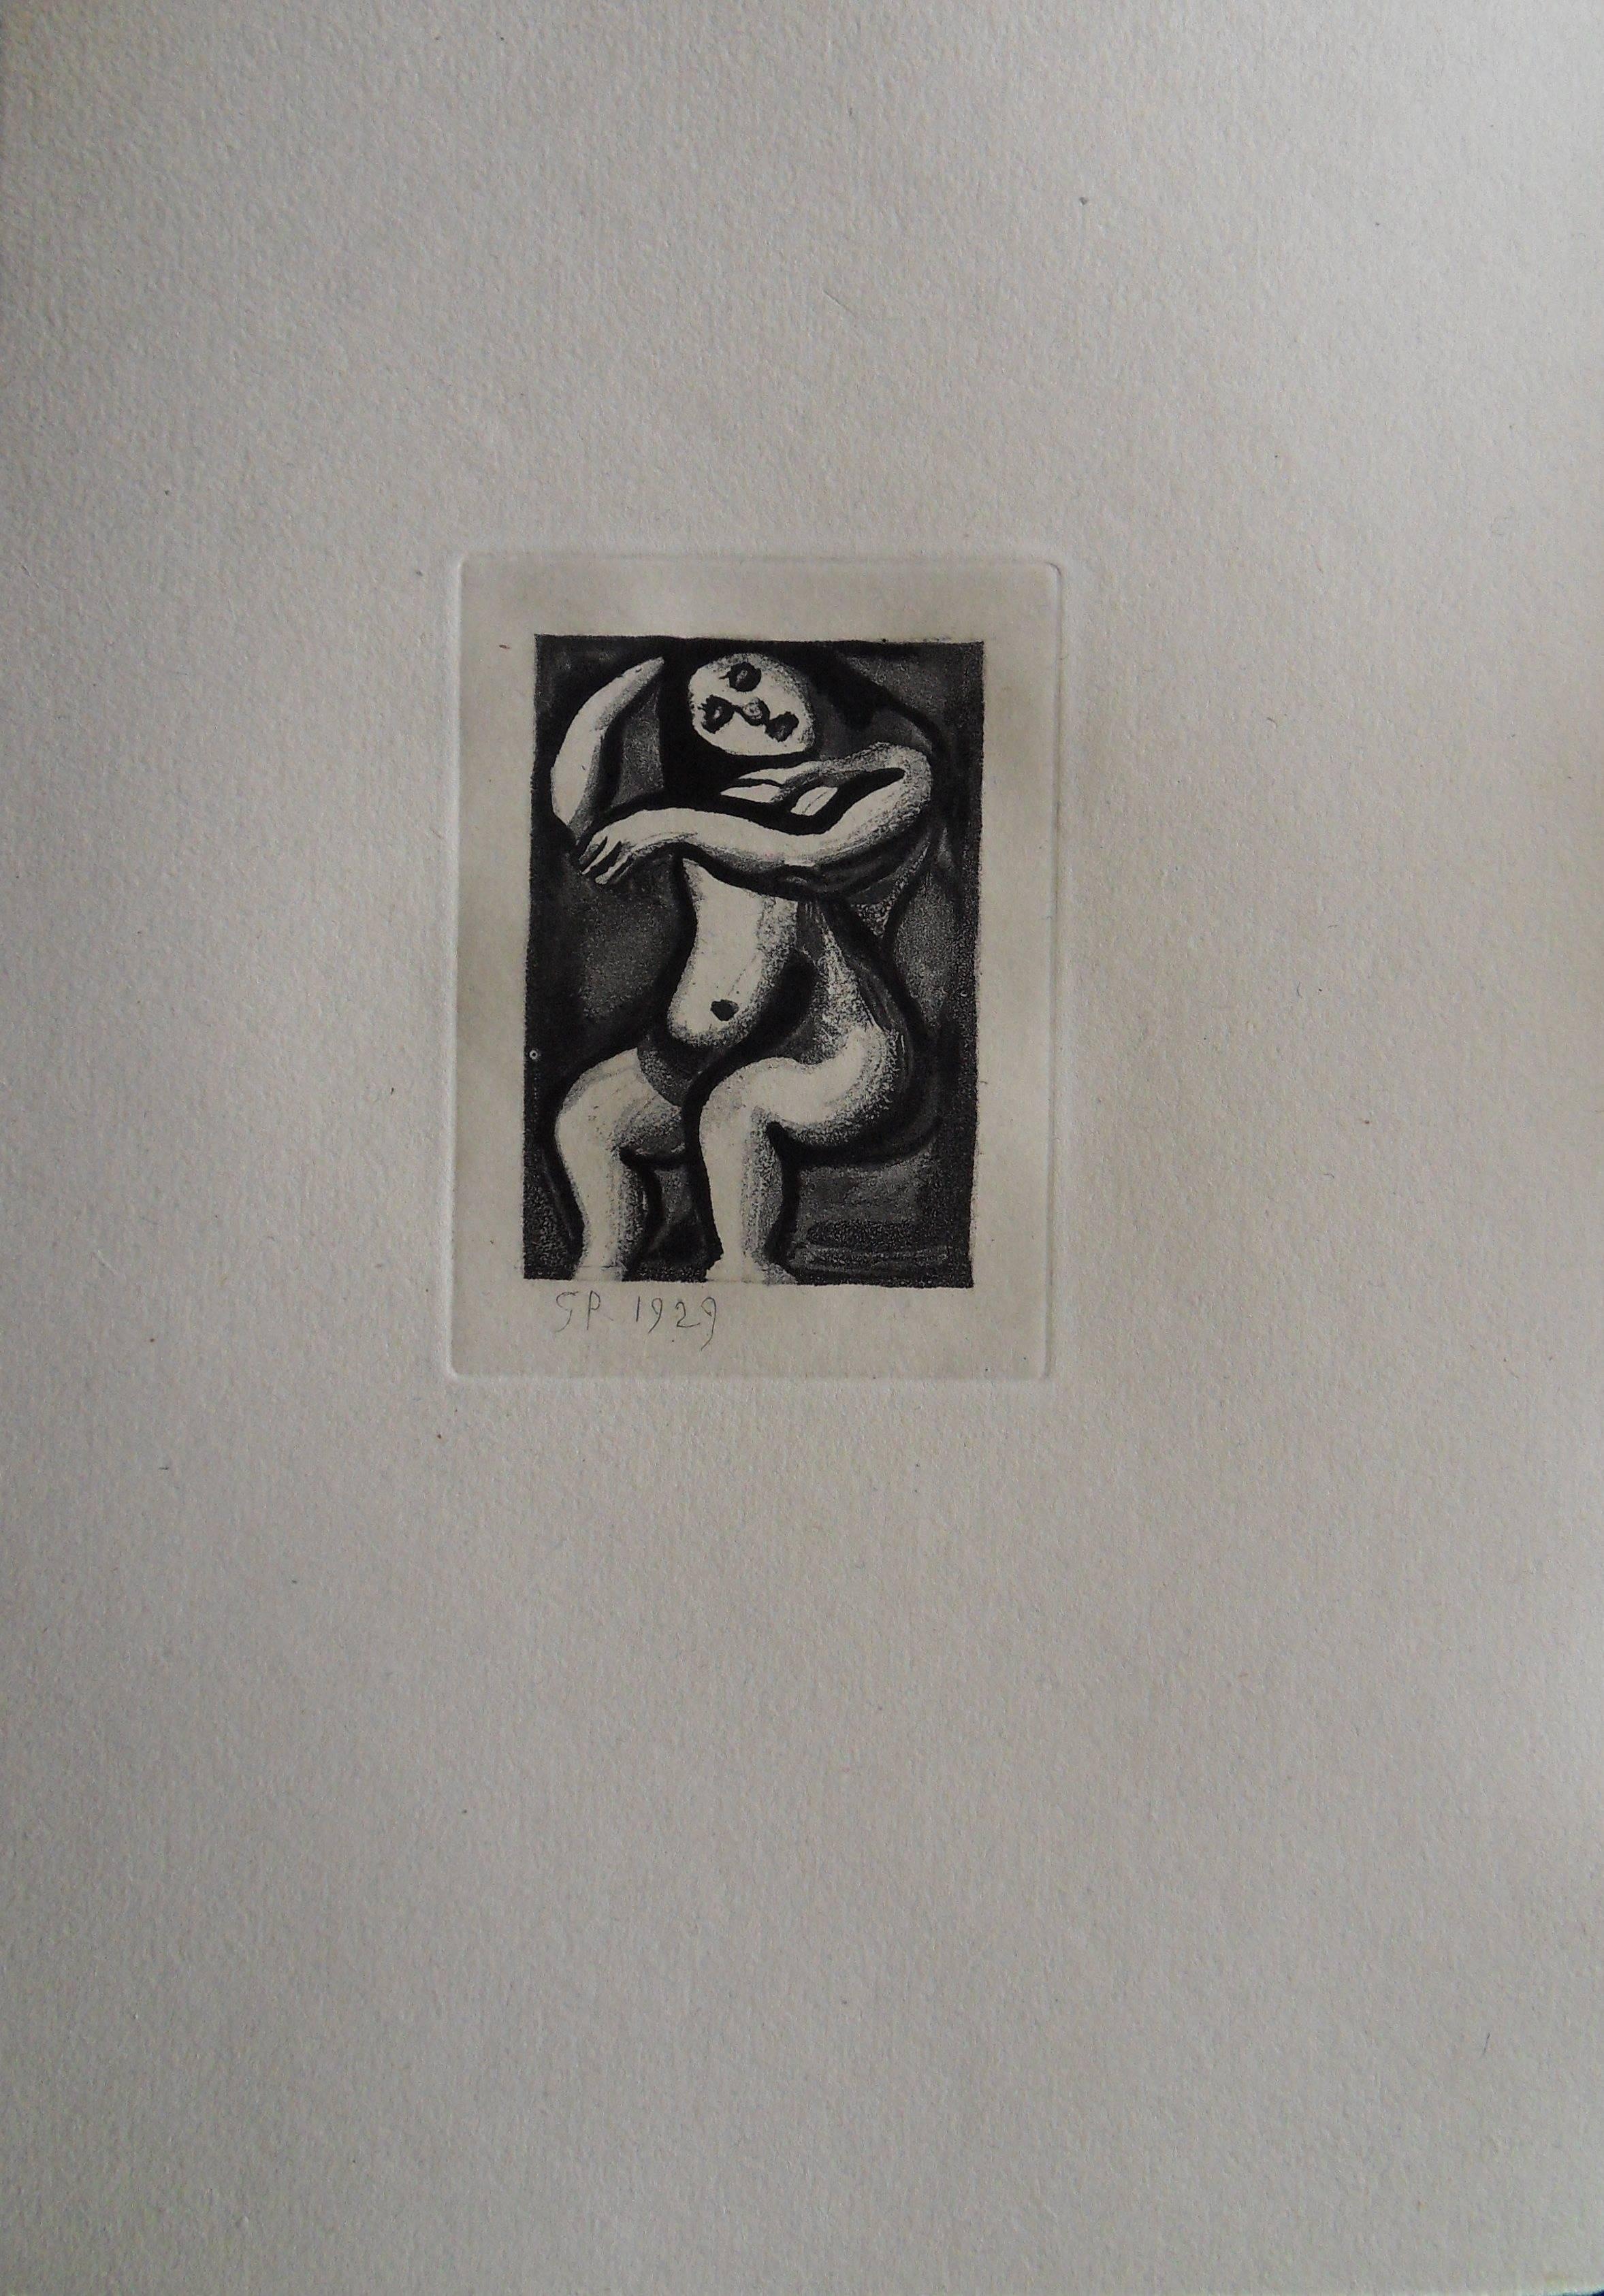 Woman Cleaning her Hair - Original etching - 1929 - Realist Print by Georges Rouault